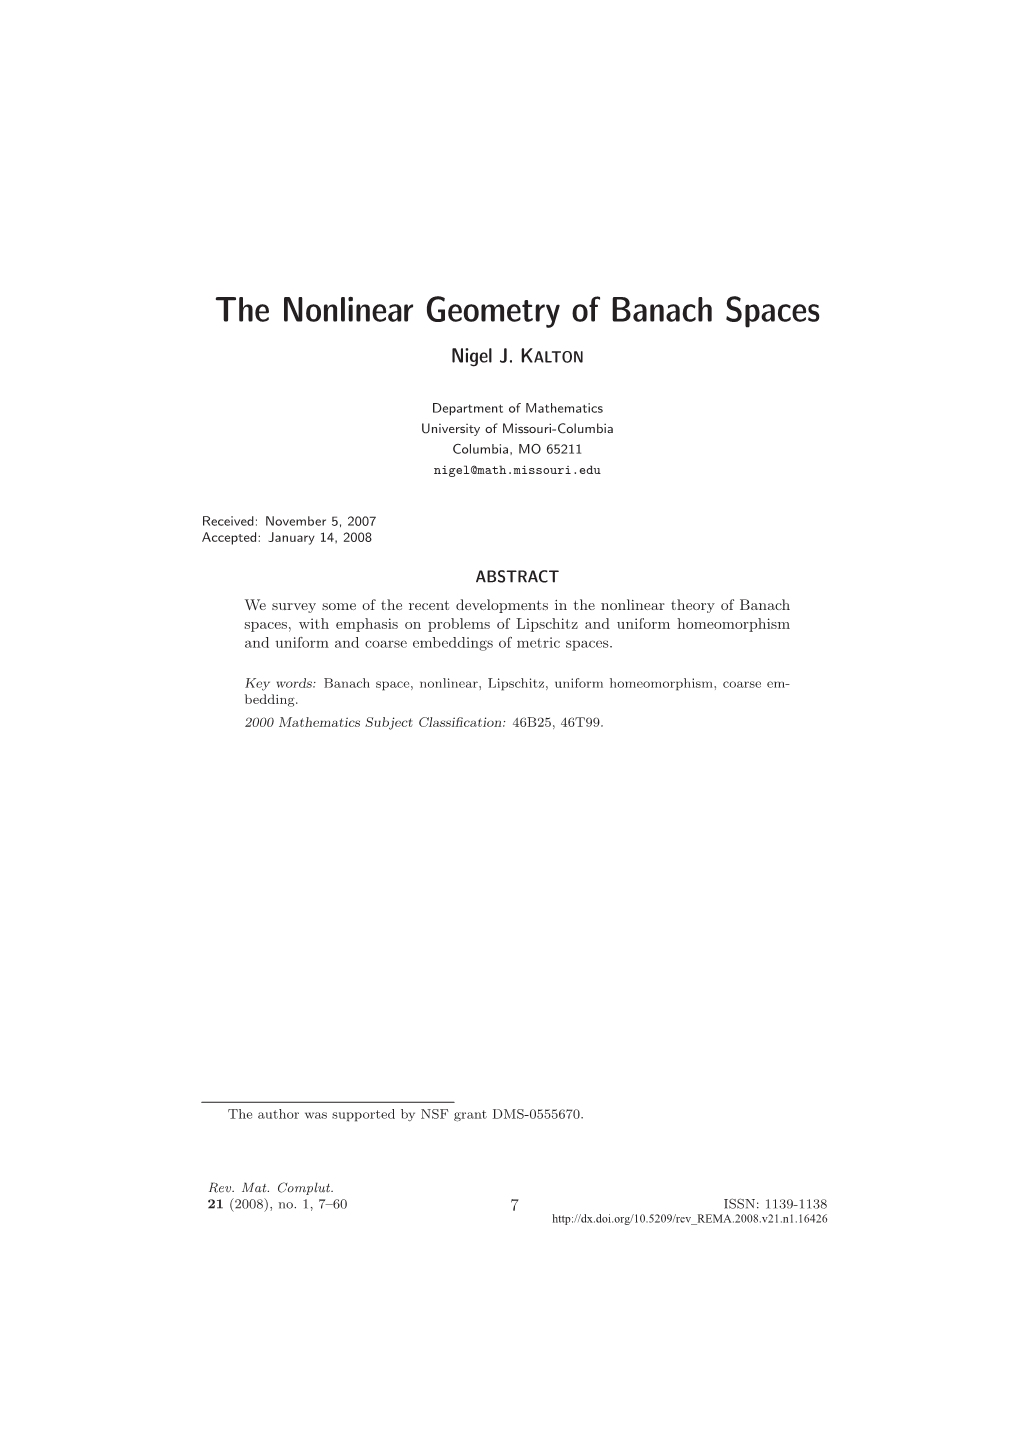 The Nonlinear Geometry of Banach Spaces